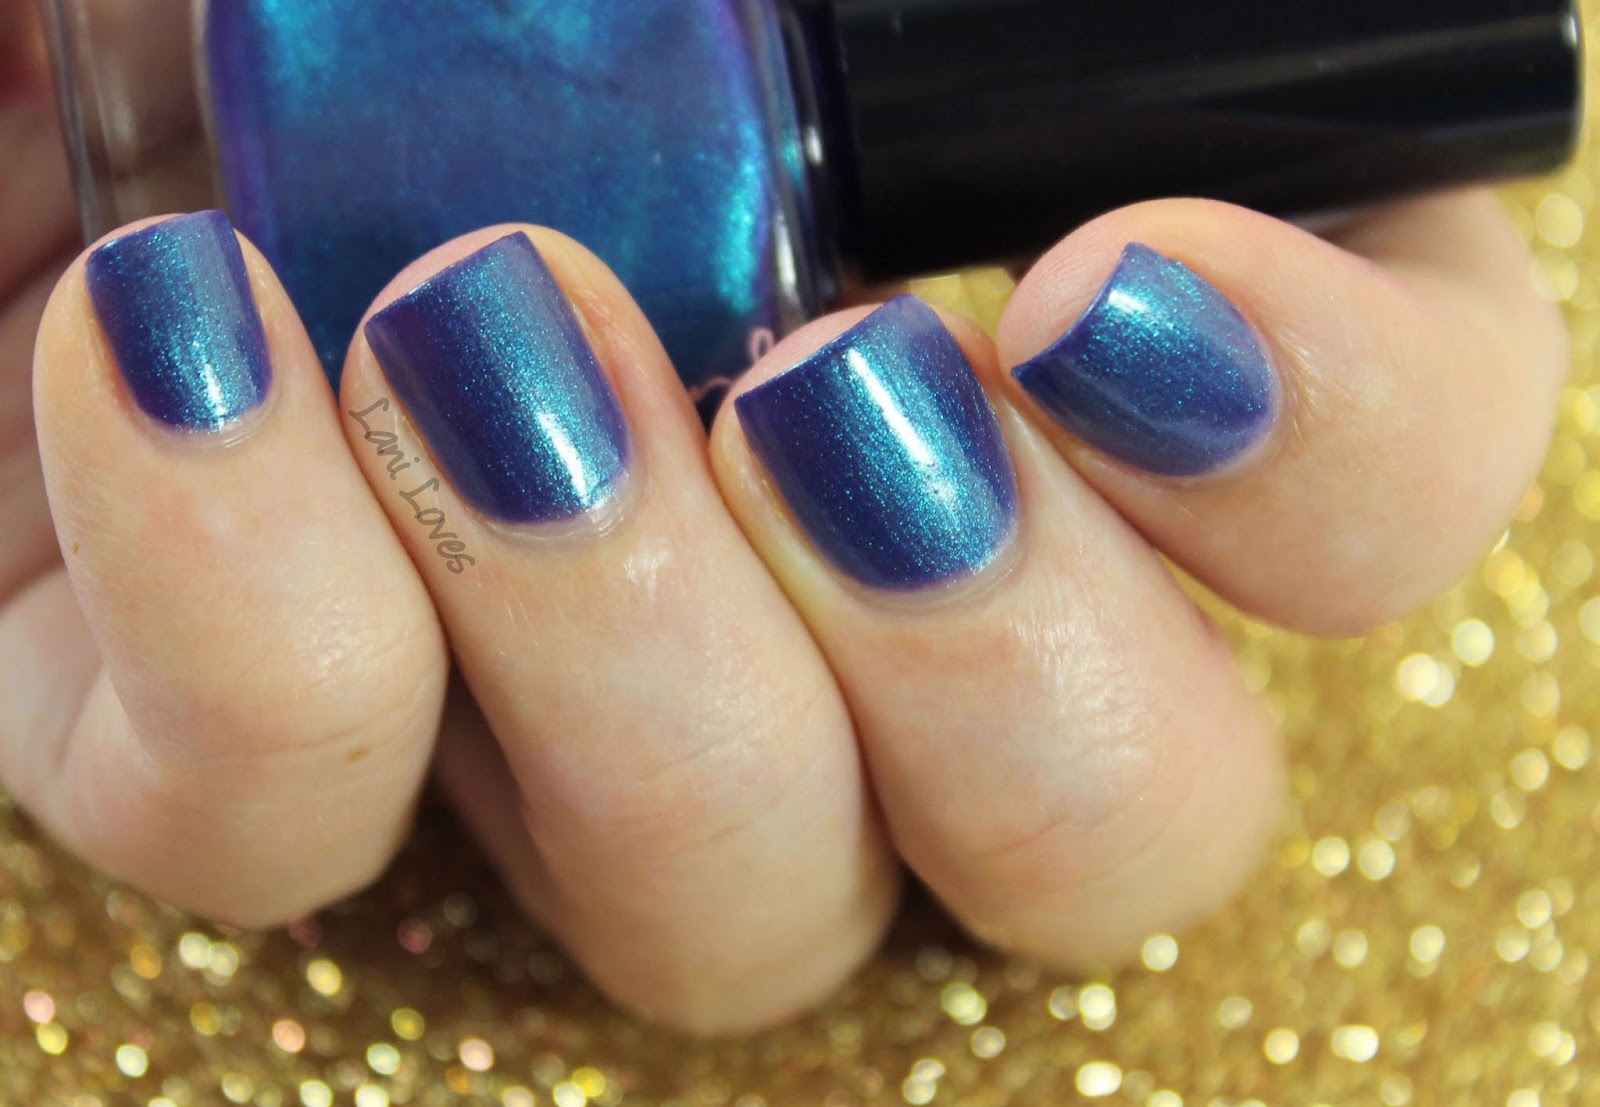 Femme Fatale Cosmetics Under the Waters nail polish swatches & review